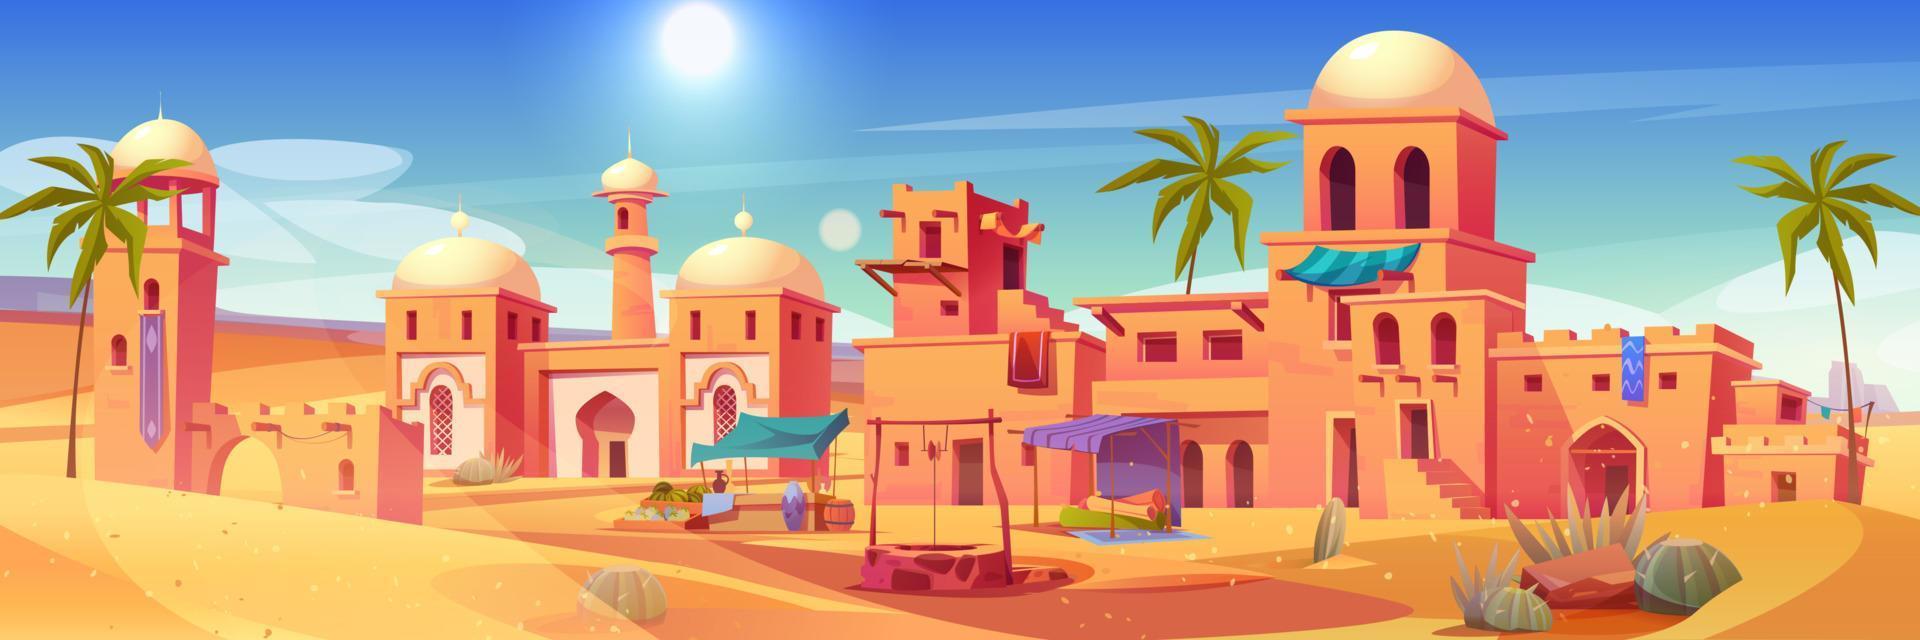 Ancient arab city with market and palace in desert vector